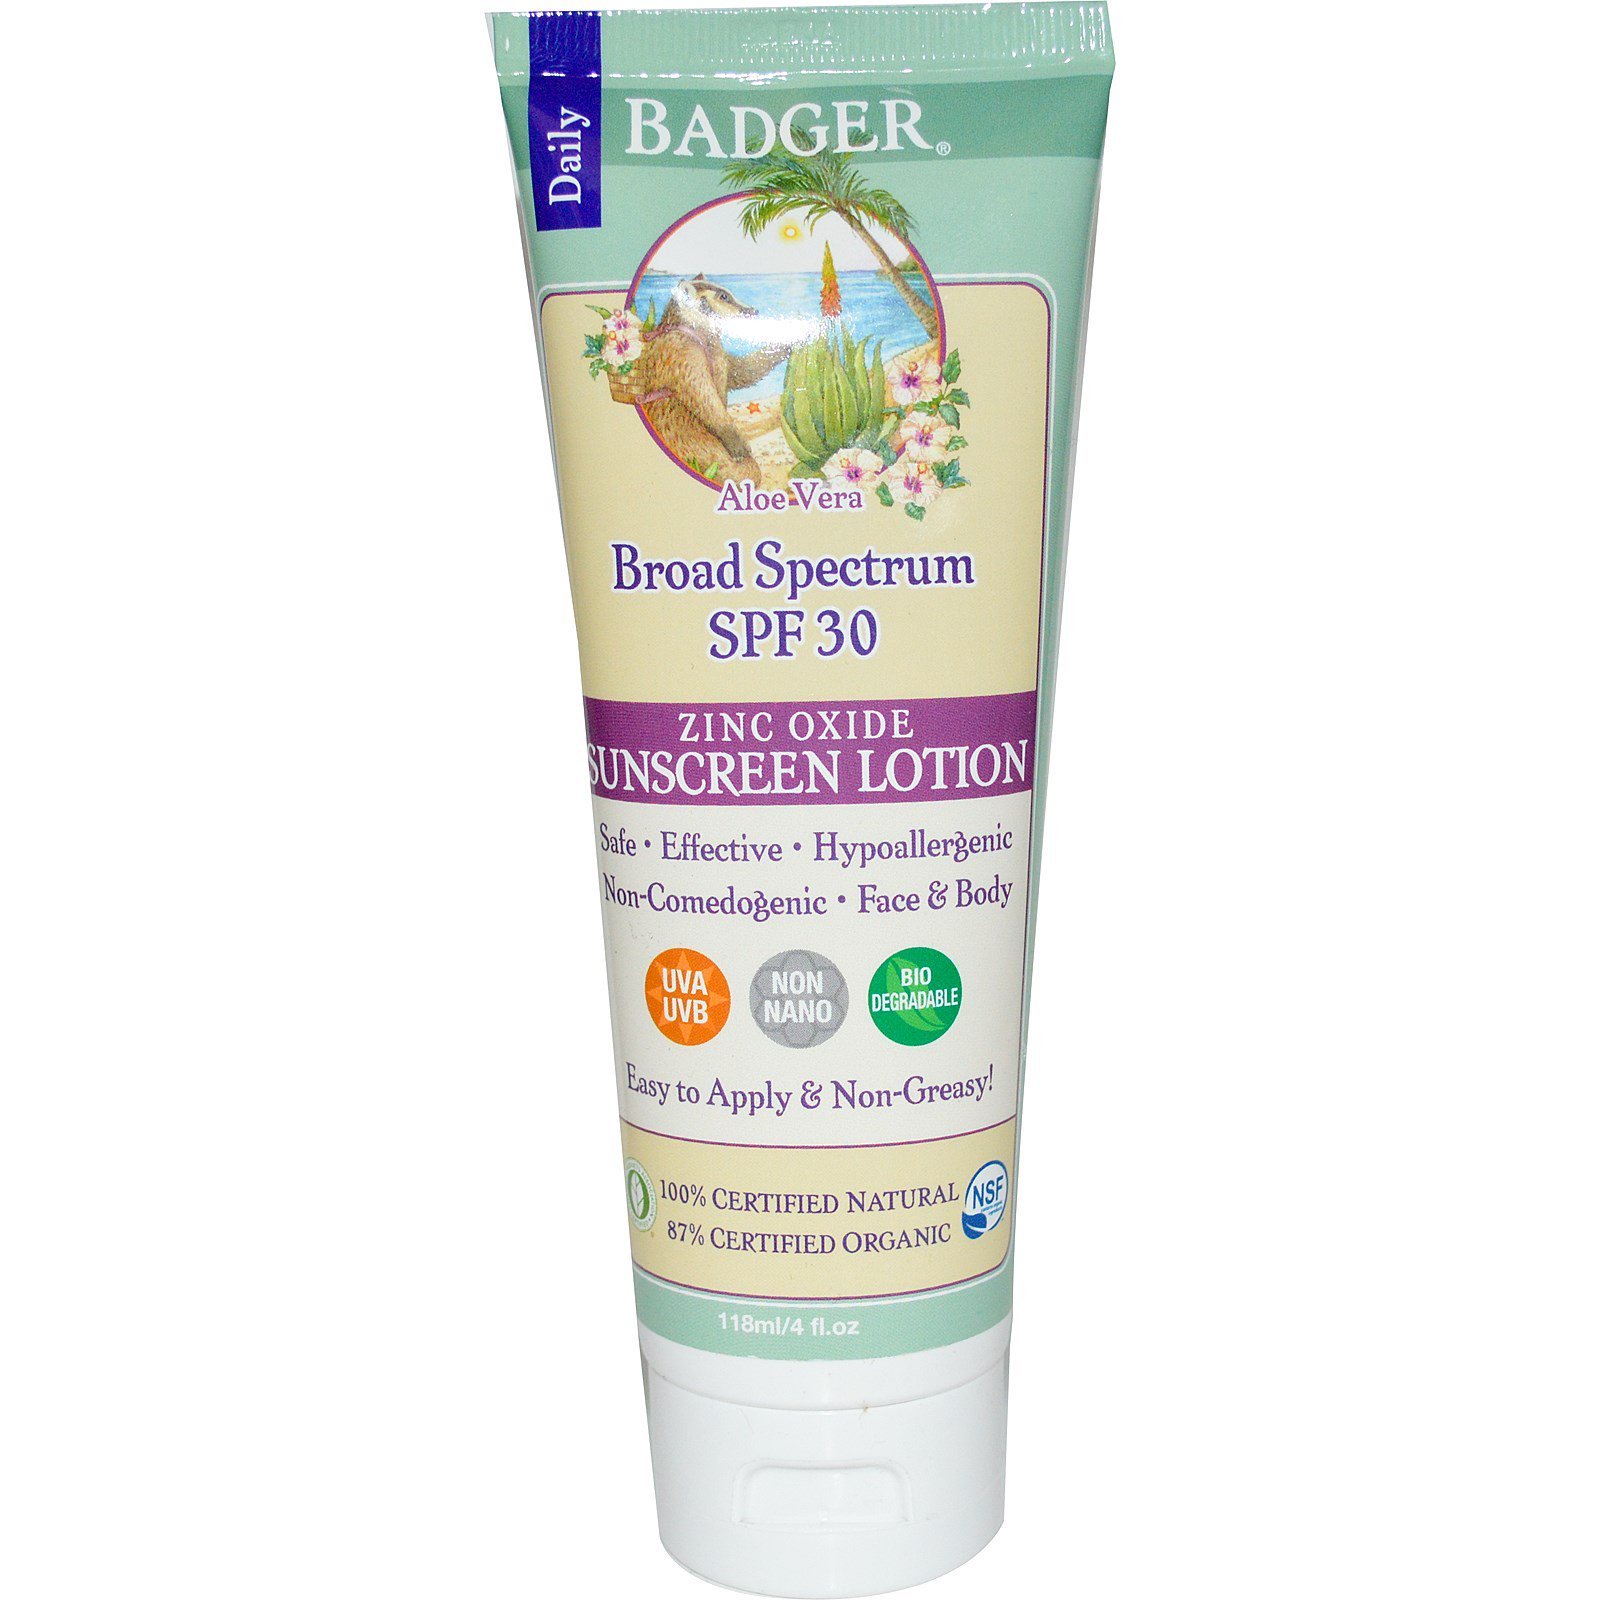 badger sunscreen cream and lotion